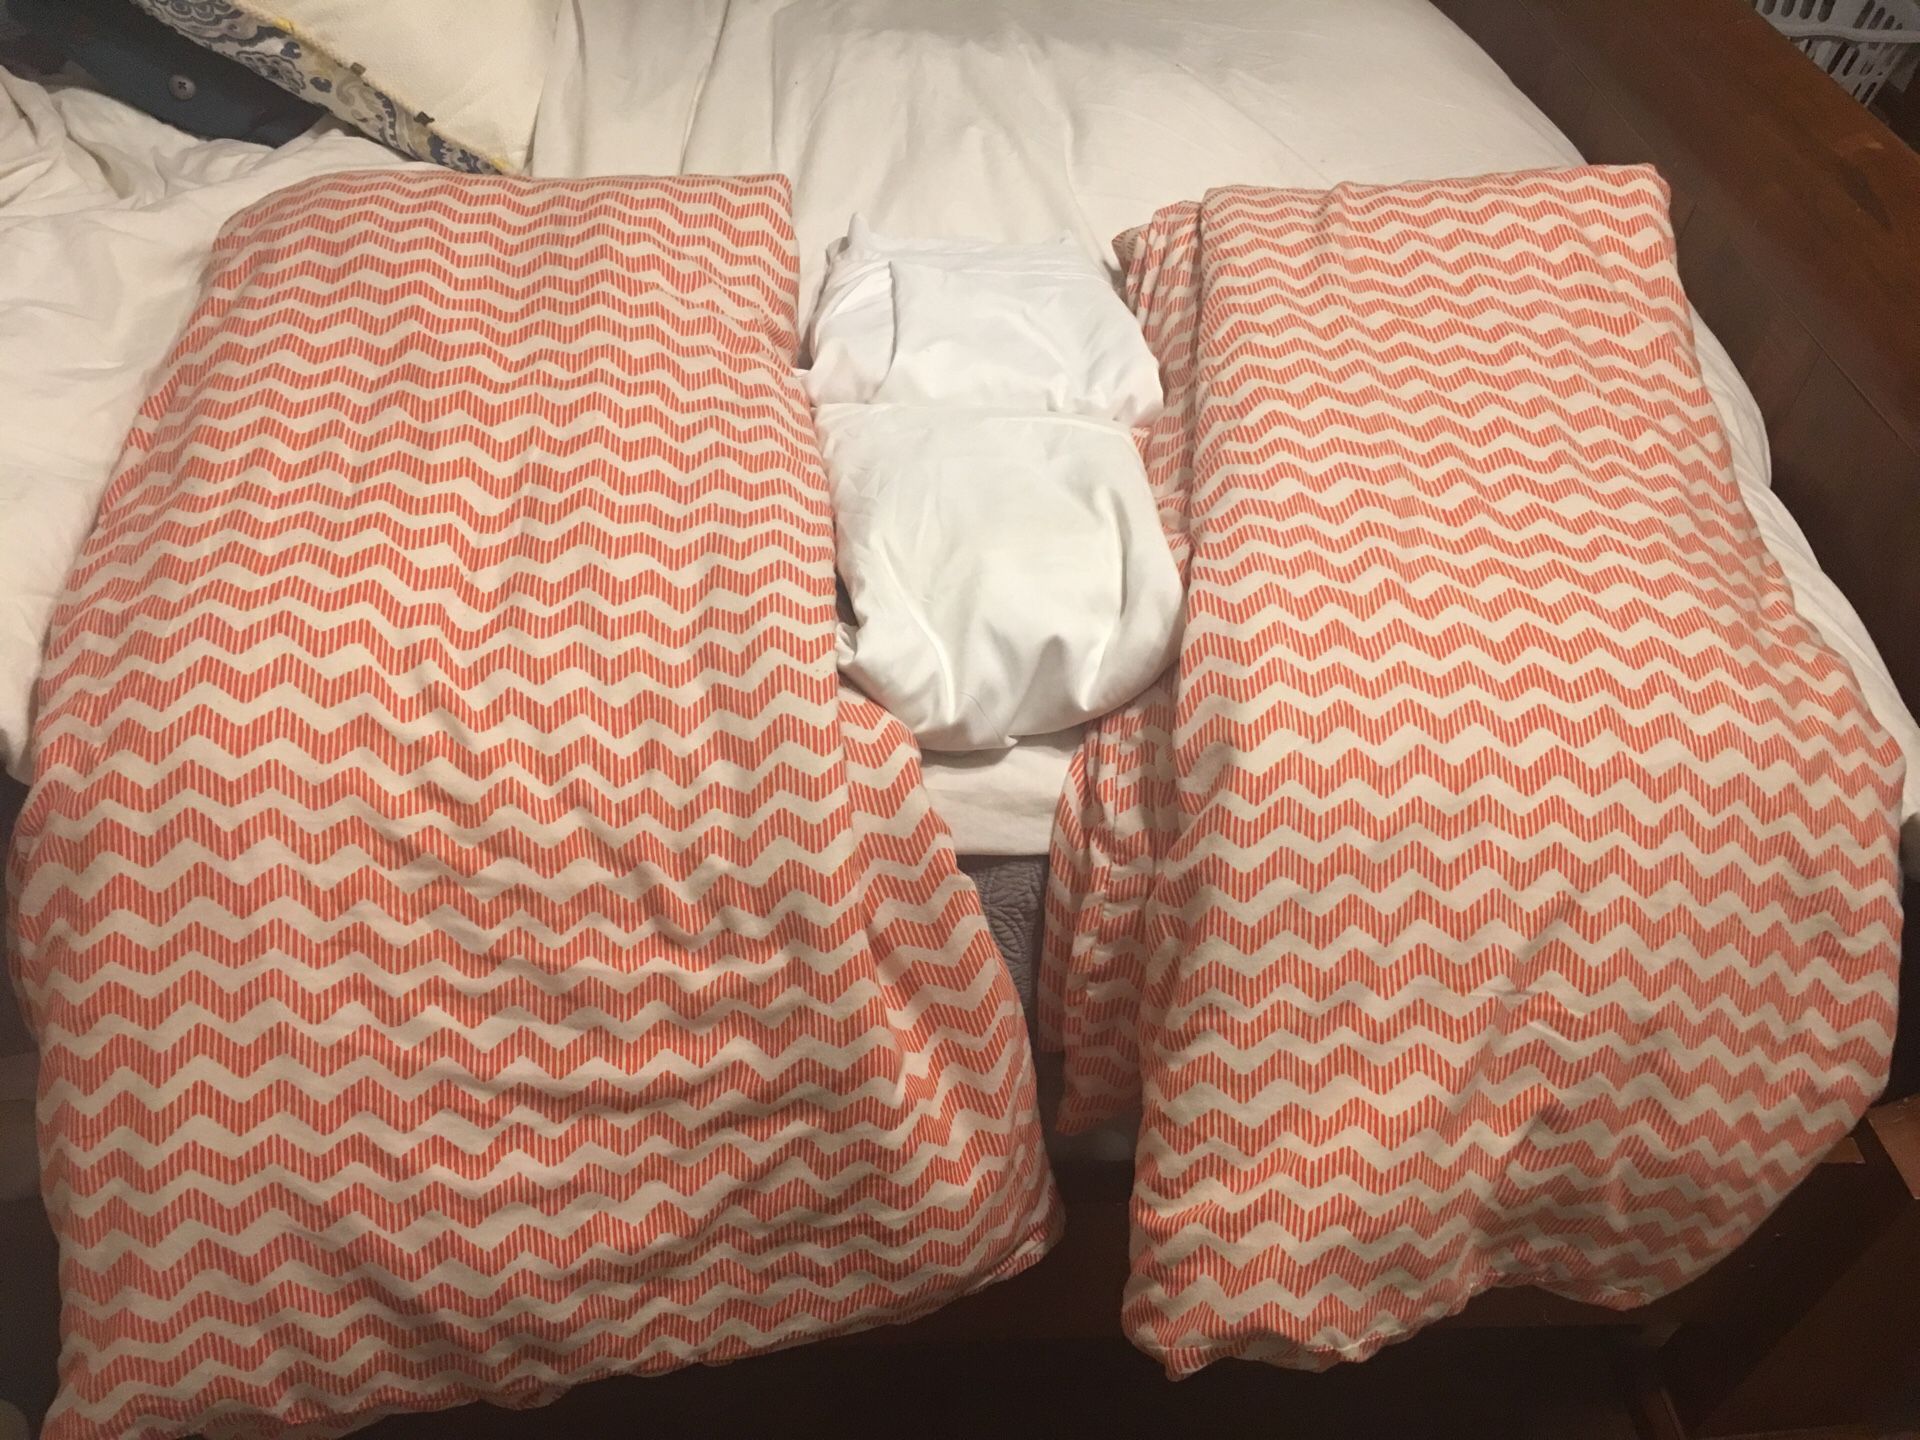 2 twins IKEA duvet covers and pillow cases and bed skirts